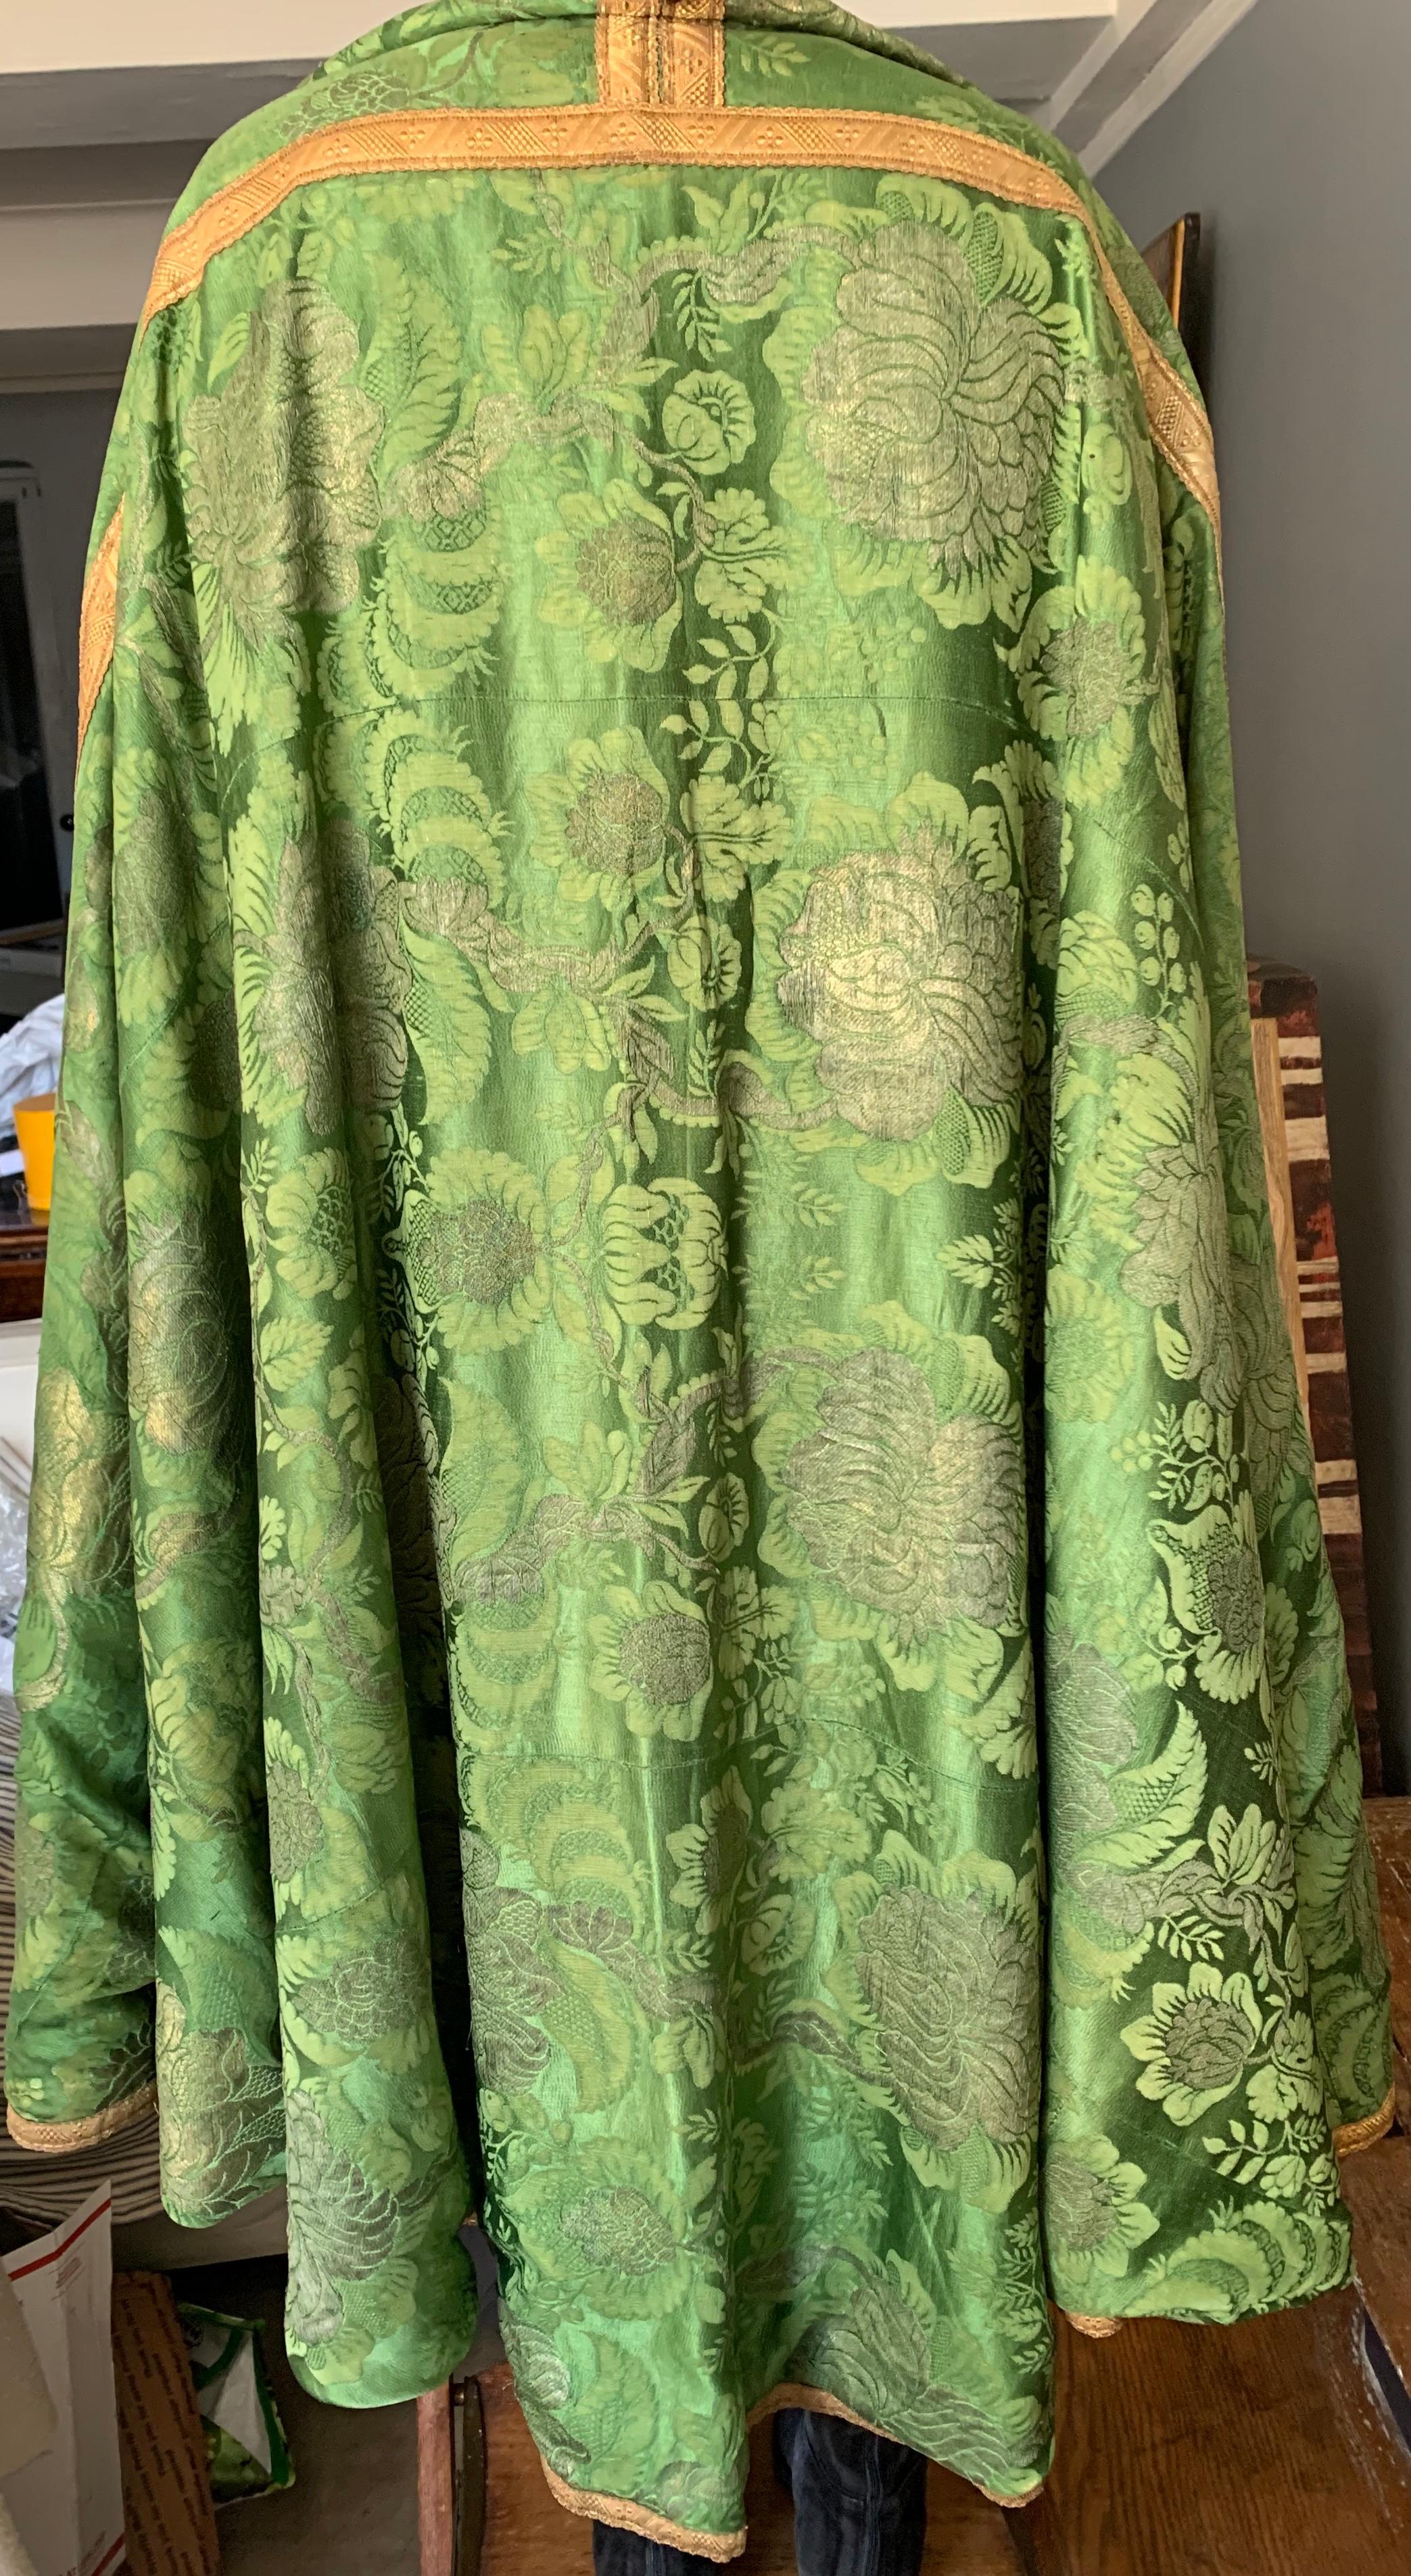 Green damask and gilt thread chasuble cape. Large floral damask in gold thread on green silk ground textile. Italy, circa 1800
Dimensions: 96